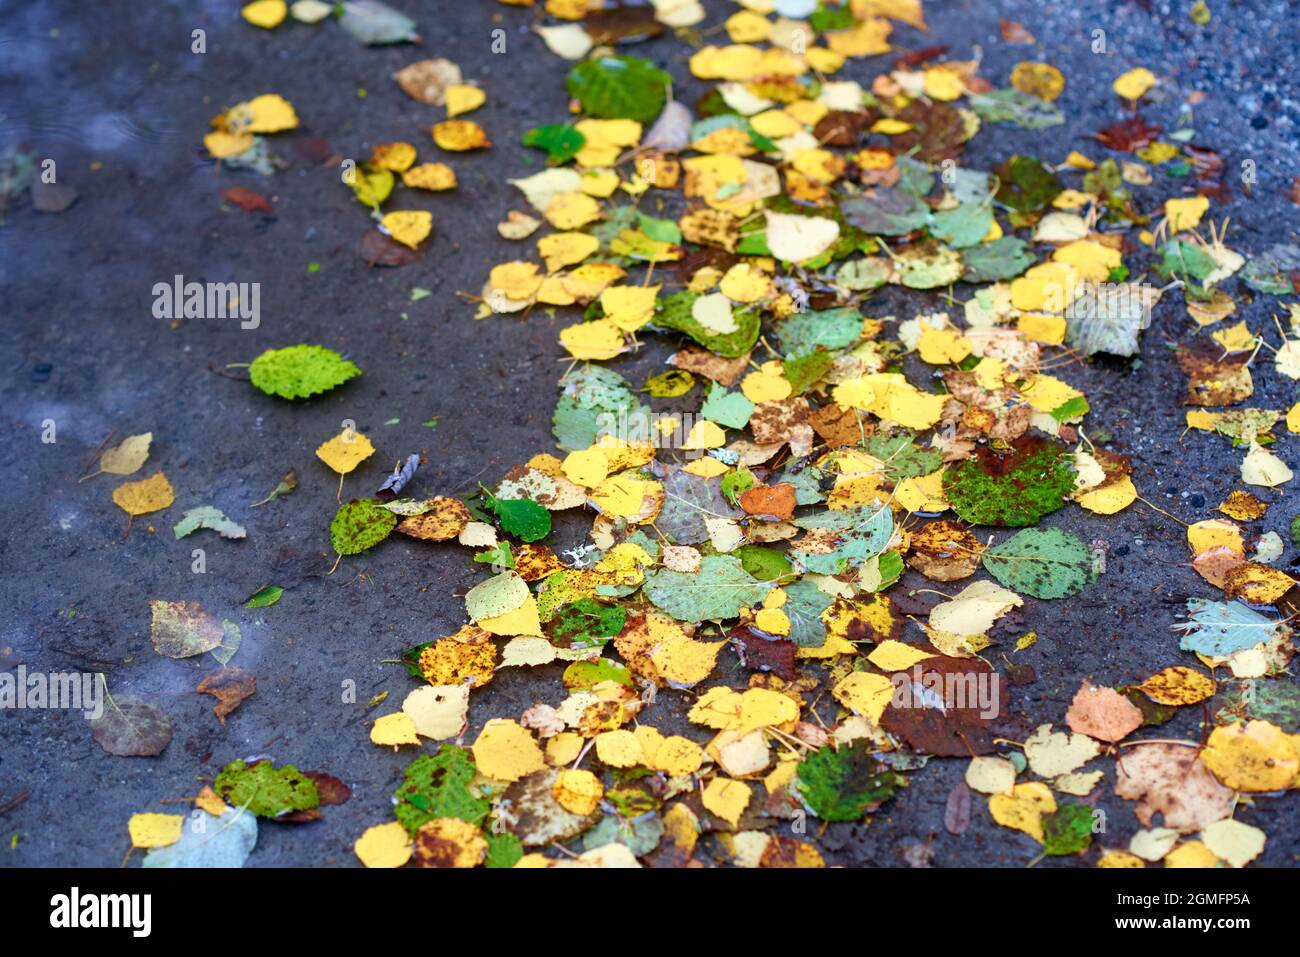 Wet fallen yellow and green leaves with leaf spot desease Stock Photo